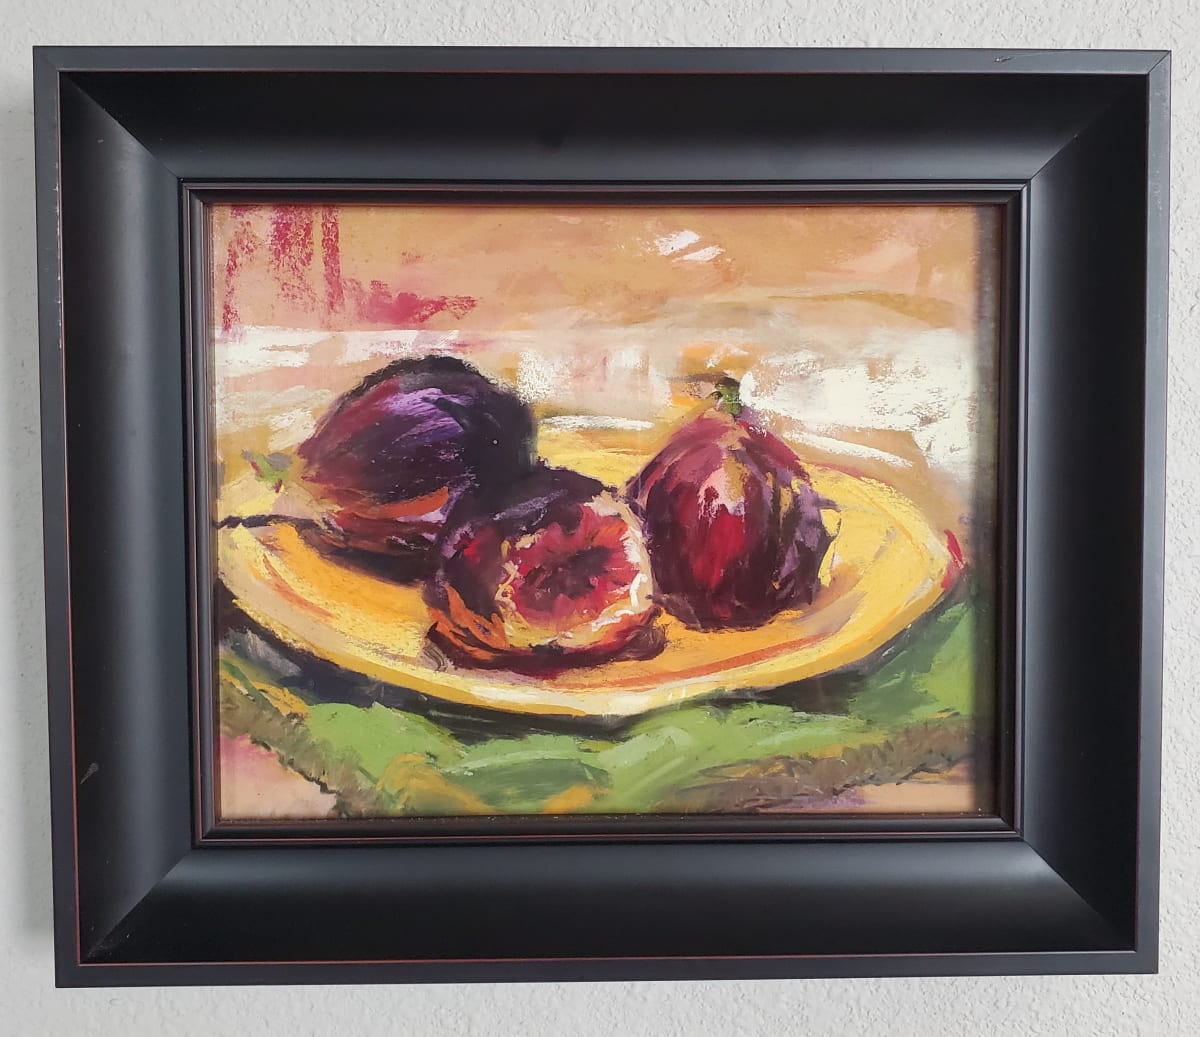 Figs in the Kitchen by Sue Rose  Image: Figs in the Kitchen, a pastel painting by Sue Rose